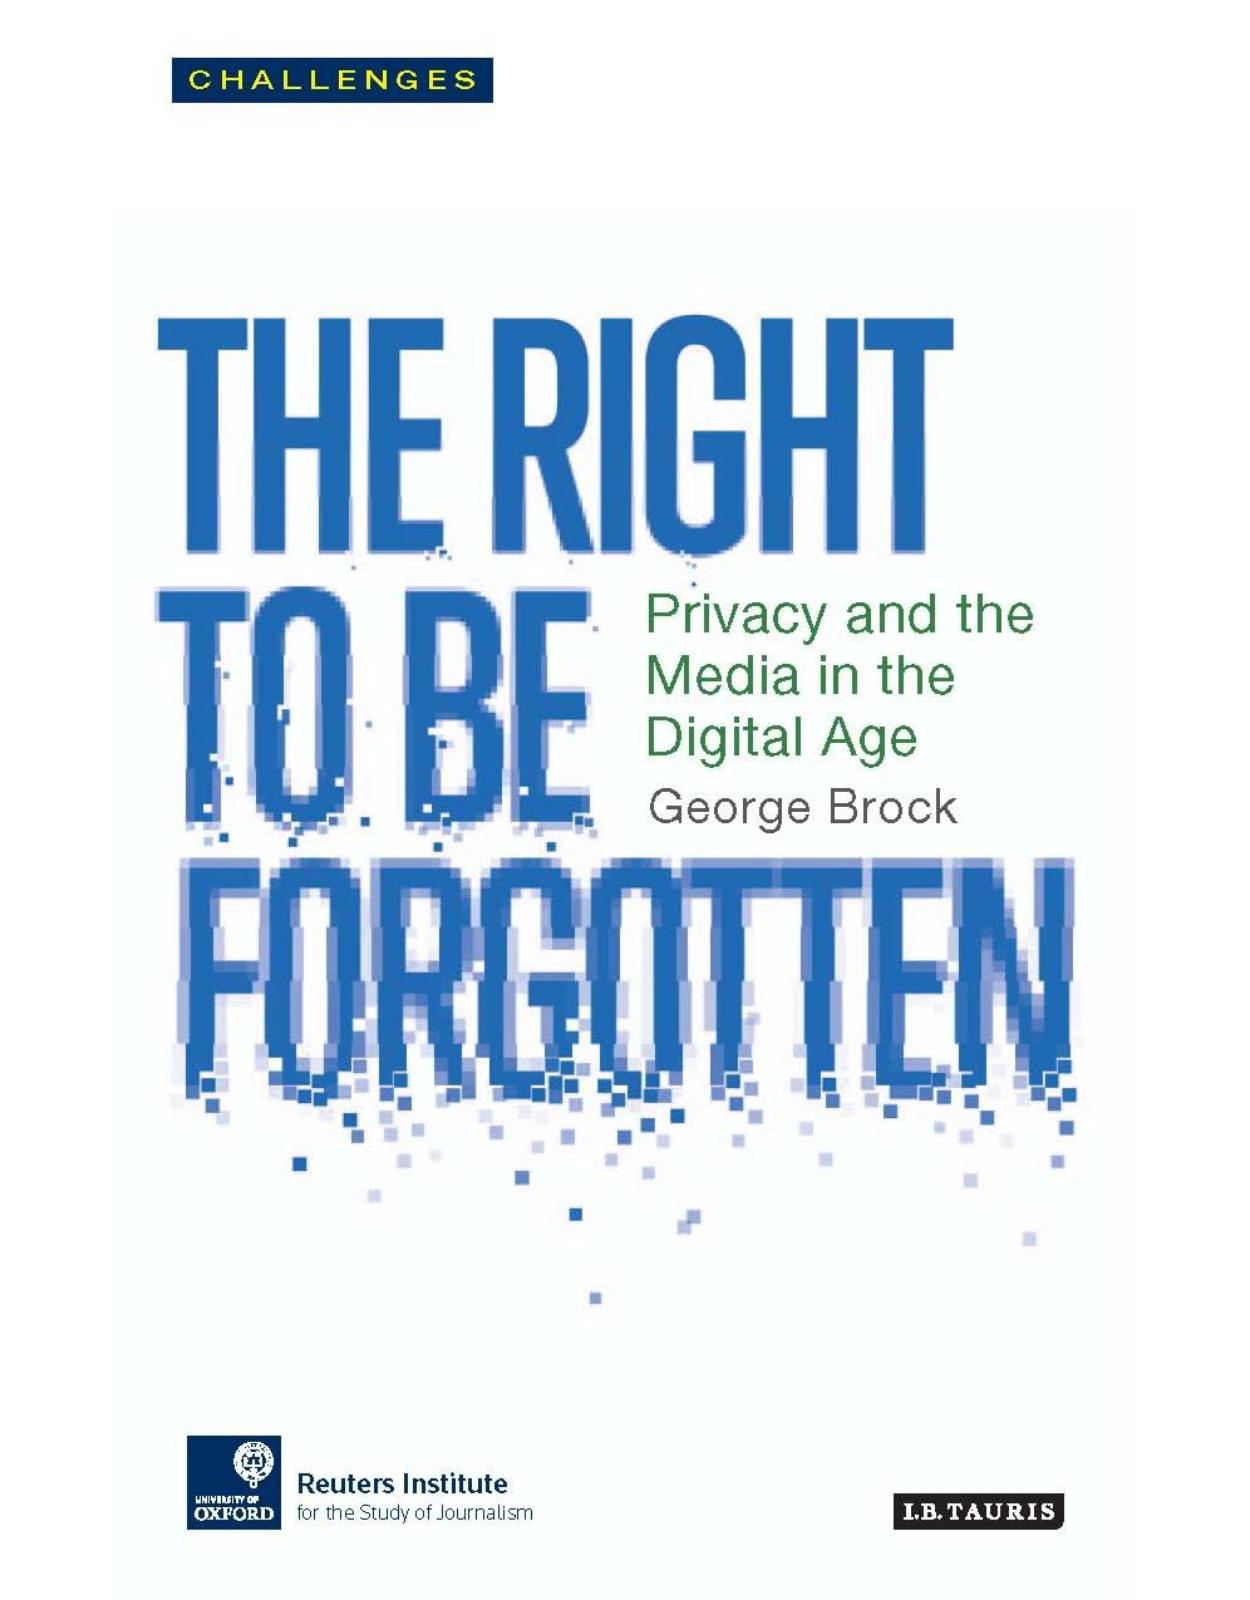 The Right to be Forgotten: Privacy and the Media in the Digital Age (RISJ Challenges Series)